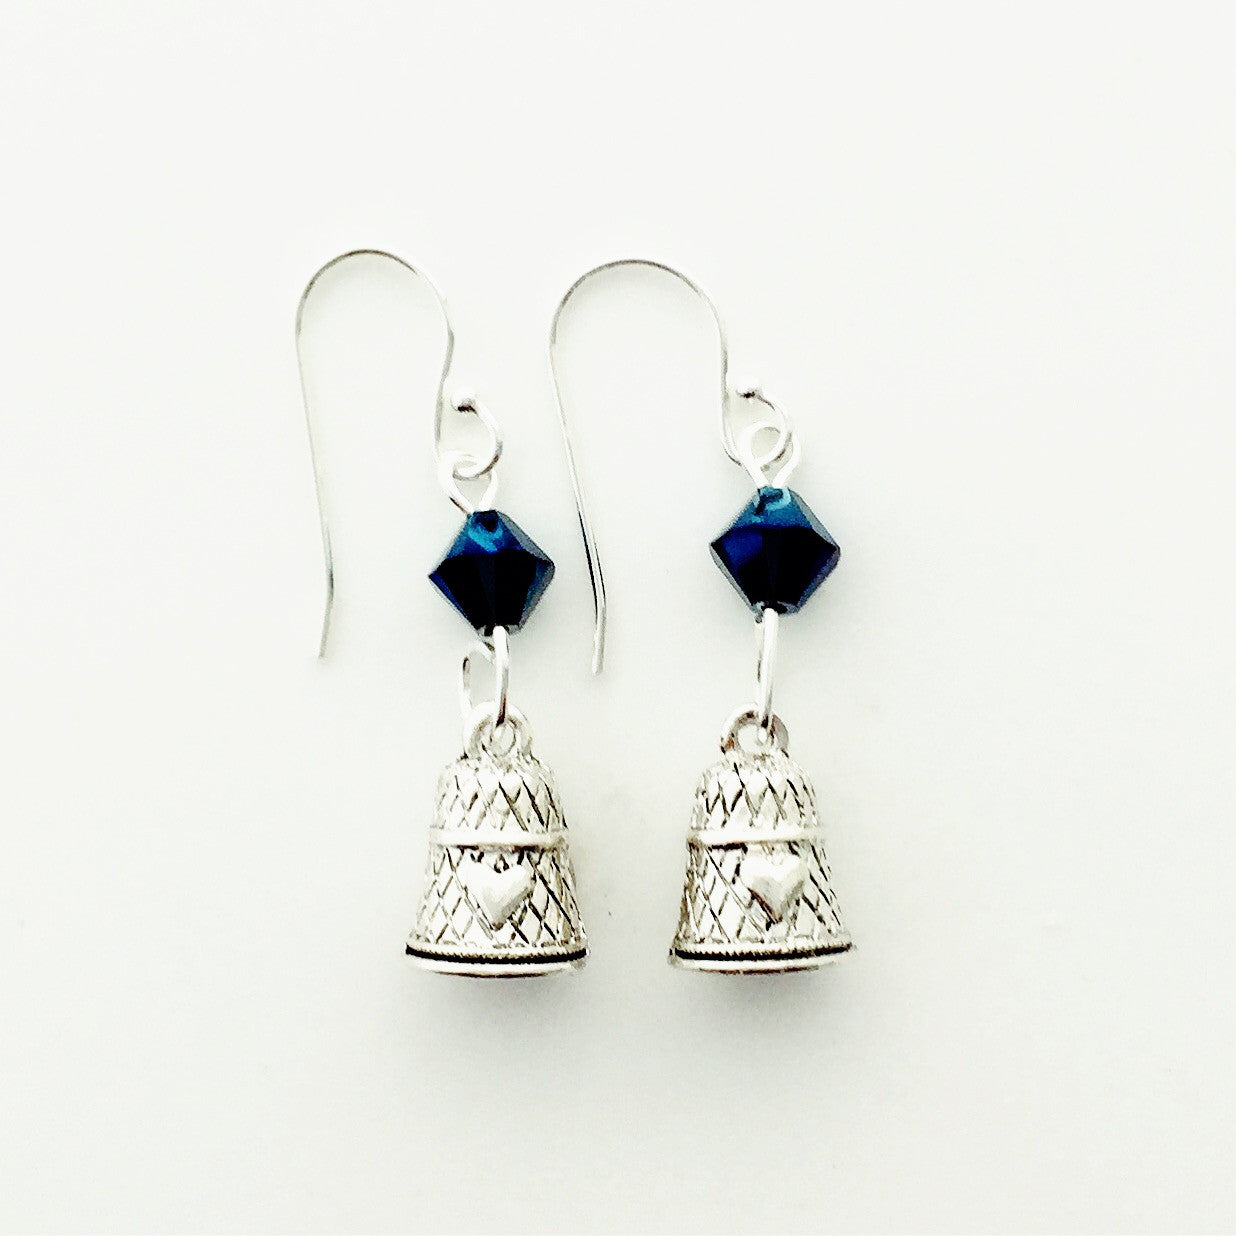 ____ Thimble Silver Earrings with Blue Swarovski Crystals.